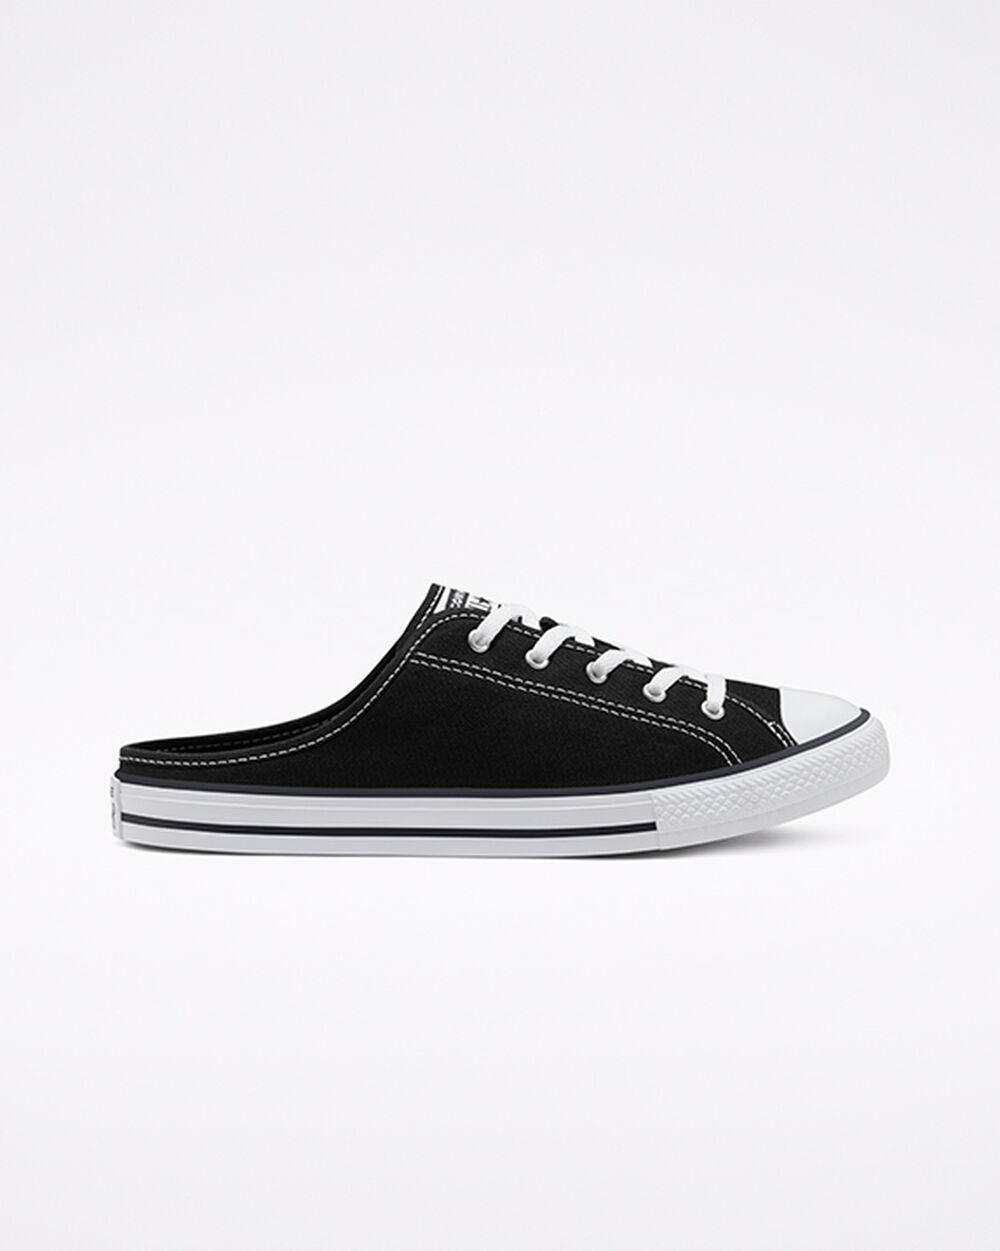 Slip On Converse Chuck Taylor All Star Mujer Negros Blancos | Mexico-31676